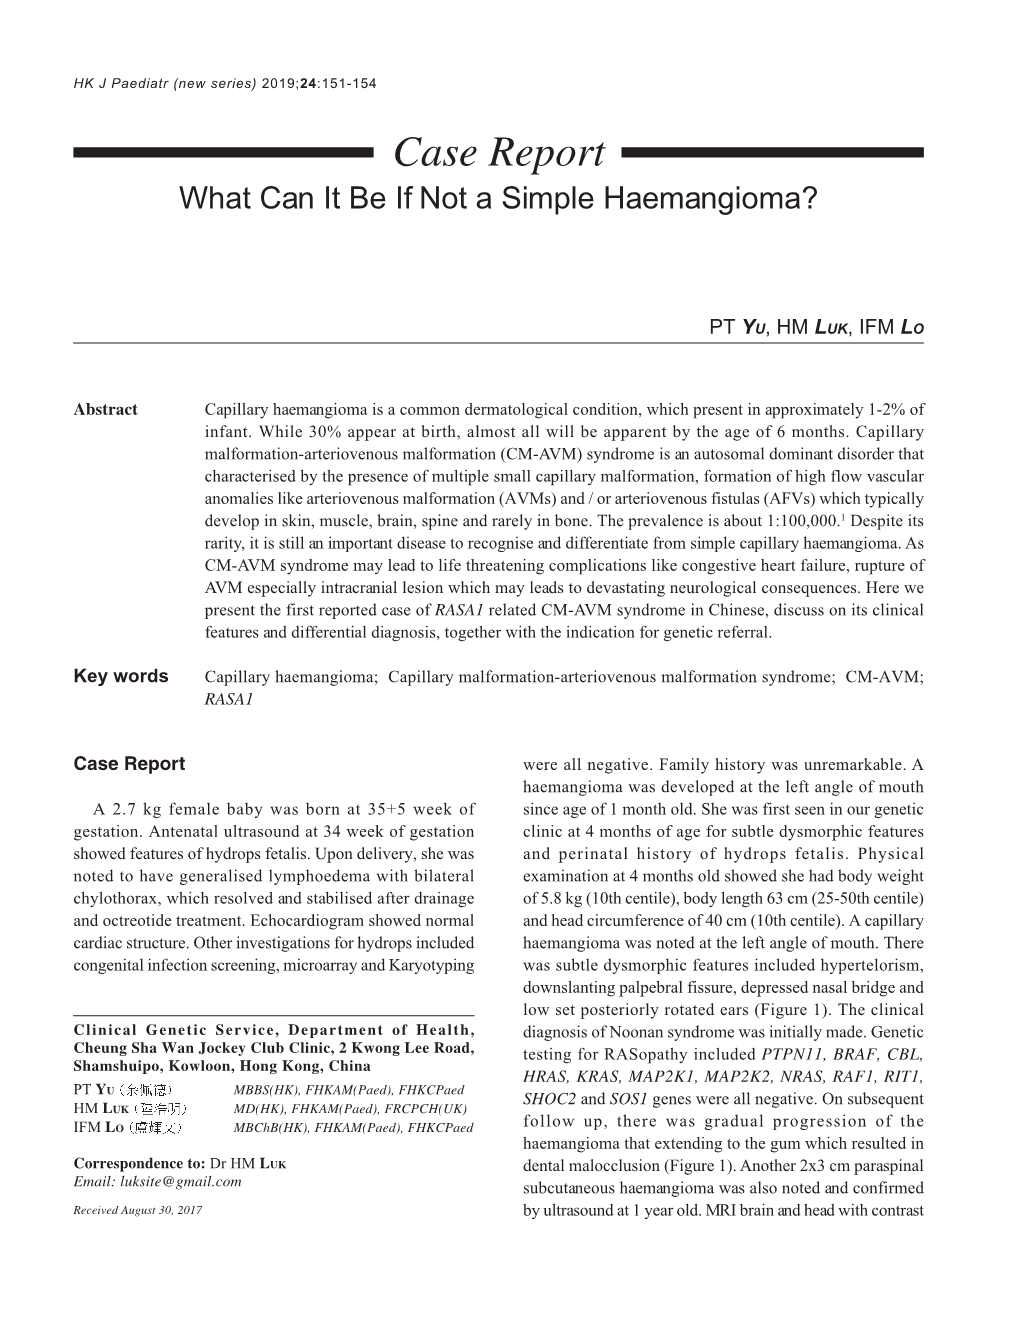 Case Report What Can It Be If Not a Simple Haemangioma?